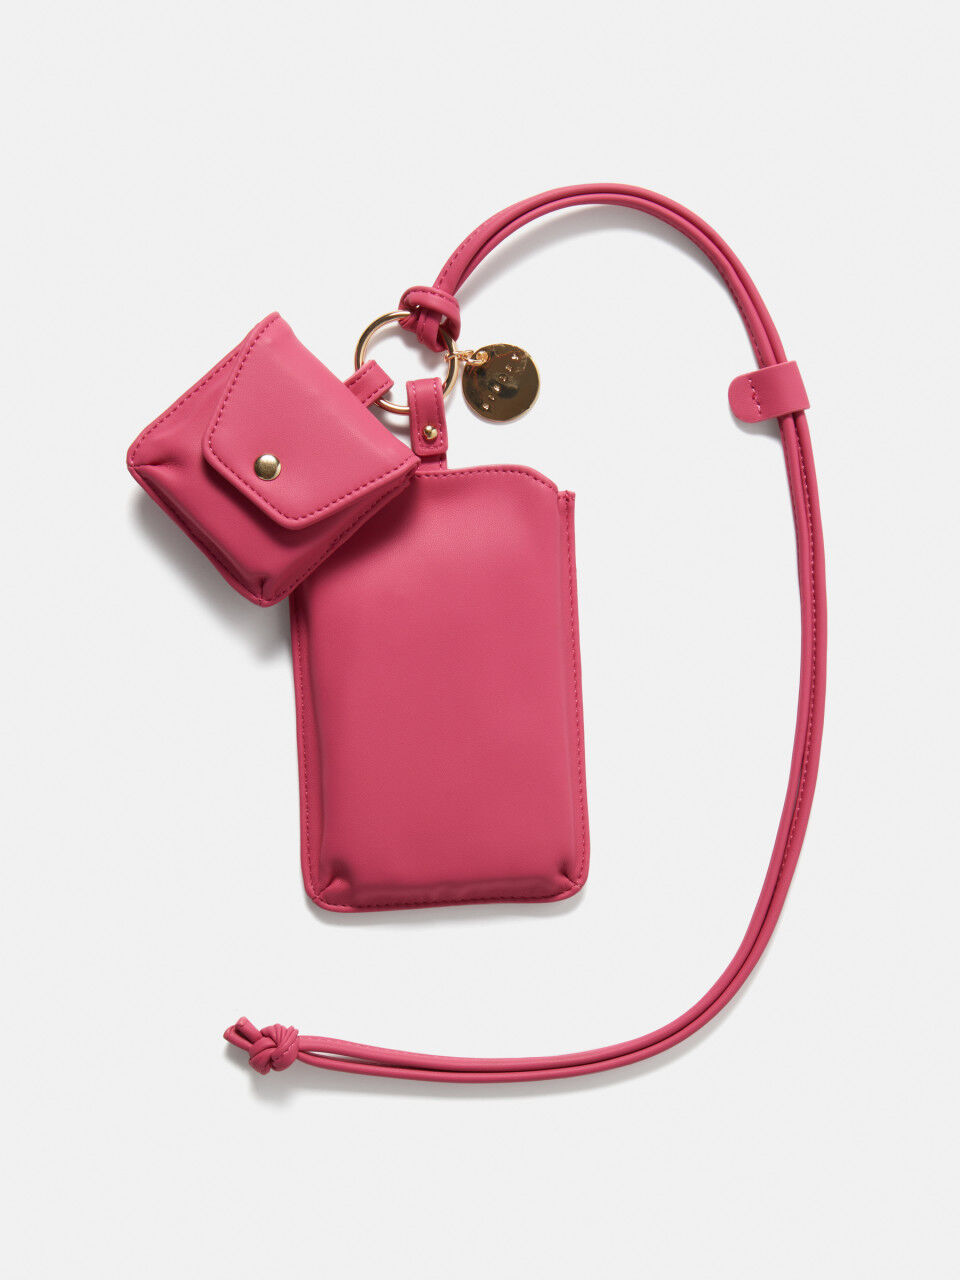 Cellphone holder with earphone pouch